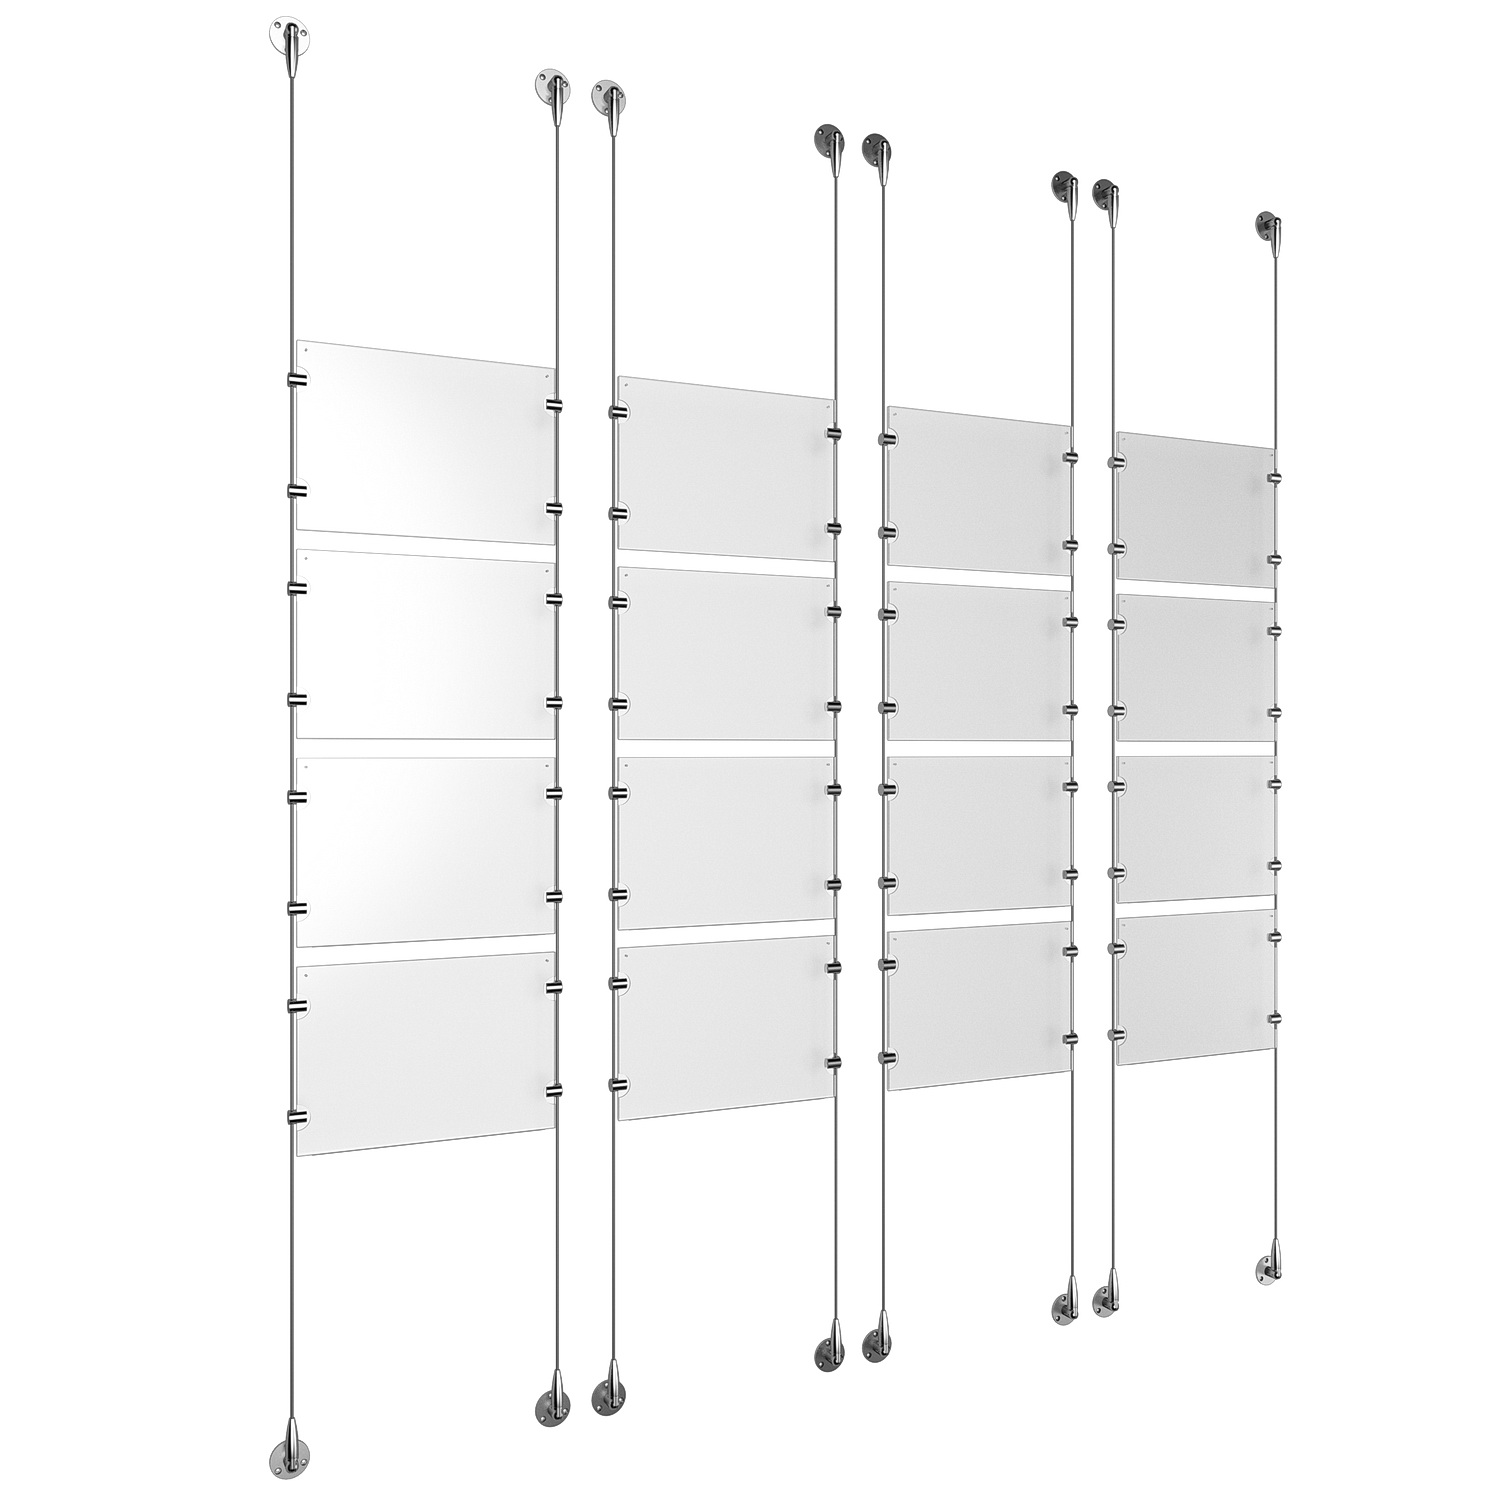 (16) 11'' Width x 8-1/2'' Height Clear Acrylic Frame & (8) Stainless Steel Satin Brushed Adjustable Angle Signature 1/8'' Cable Systems with (64) Single-Sided Panel Grippers